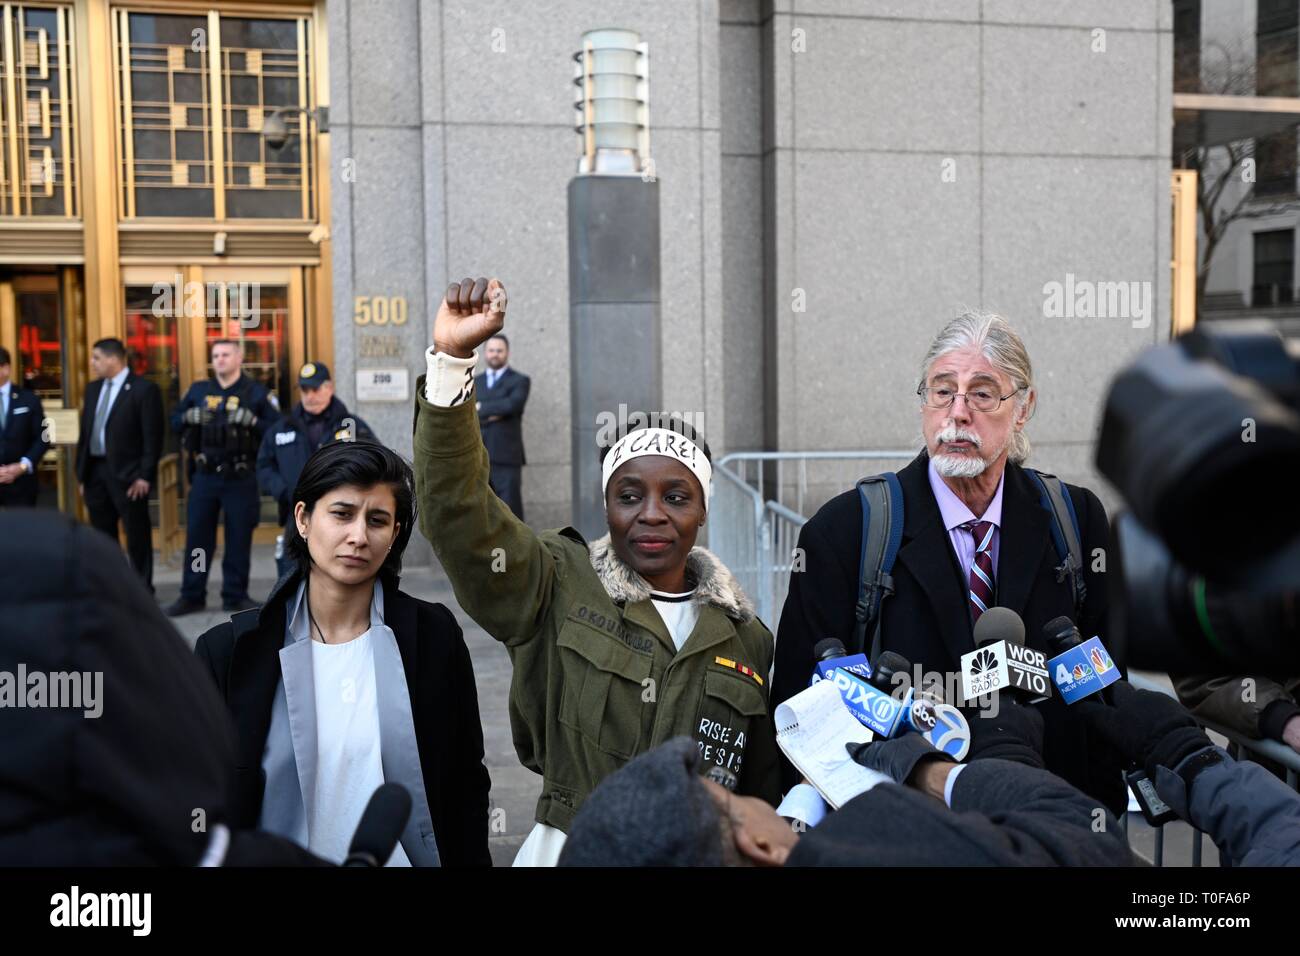 New York, NY, USA. 19 March 2019  State of Liberty climber Patricia Okoumou speaks to supporters after being sentenced to 5 years of probation for her July 4, 2018, act of civil disobedience to protest against Trump administration immigration policies.  Okoumou was convicted in December of misdemeanor charges of trespassing, disorderly conduct, and interfering with the functioning of government. Credit: Joseph Reid/Alamy Live News Stock Photo